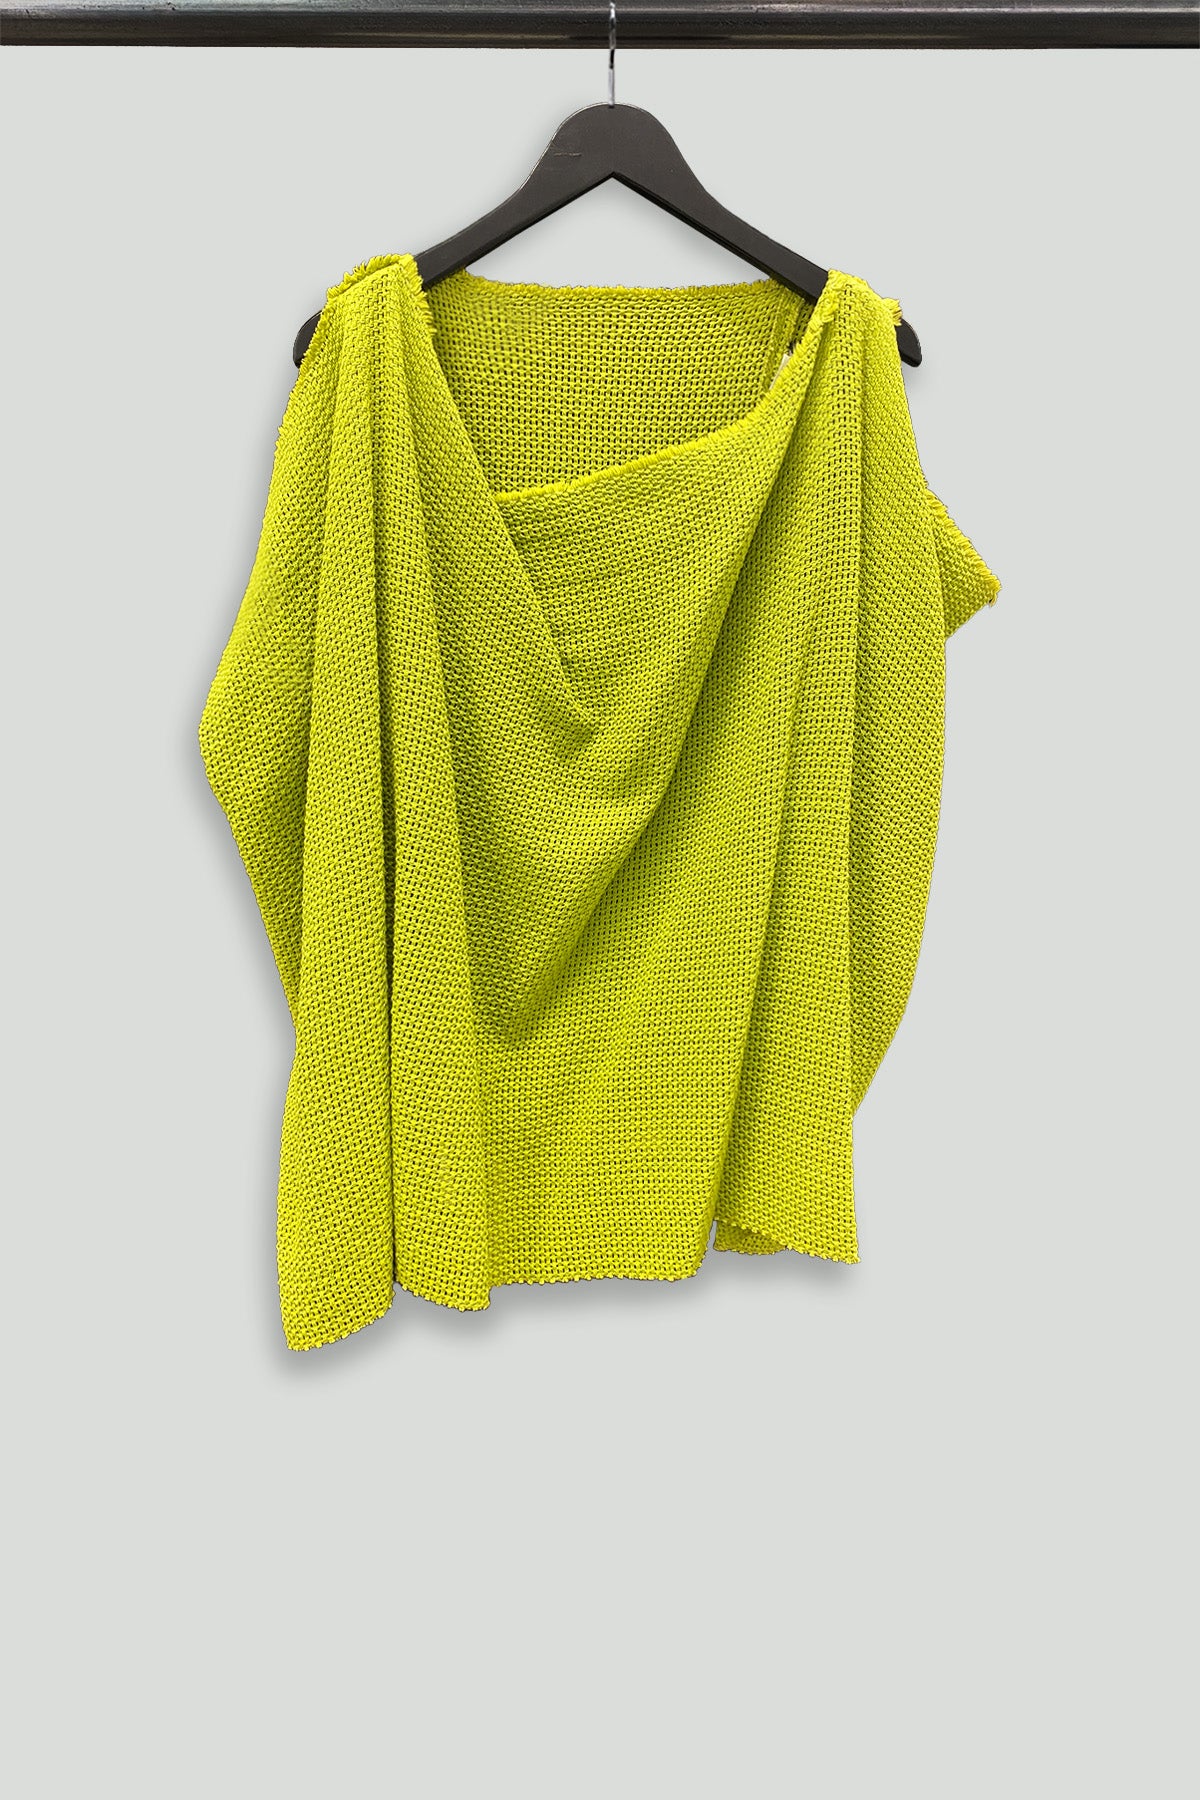 Lime Knit Cowl Shapeshifter